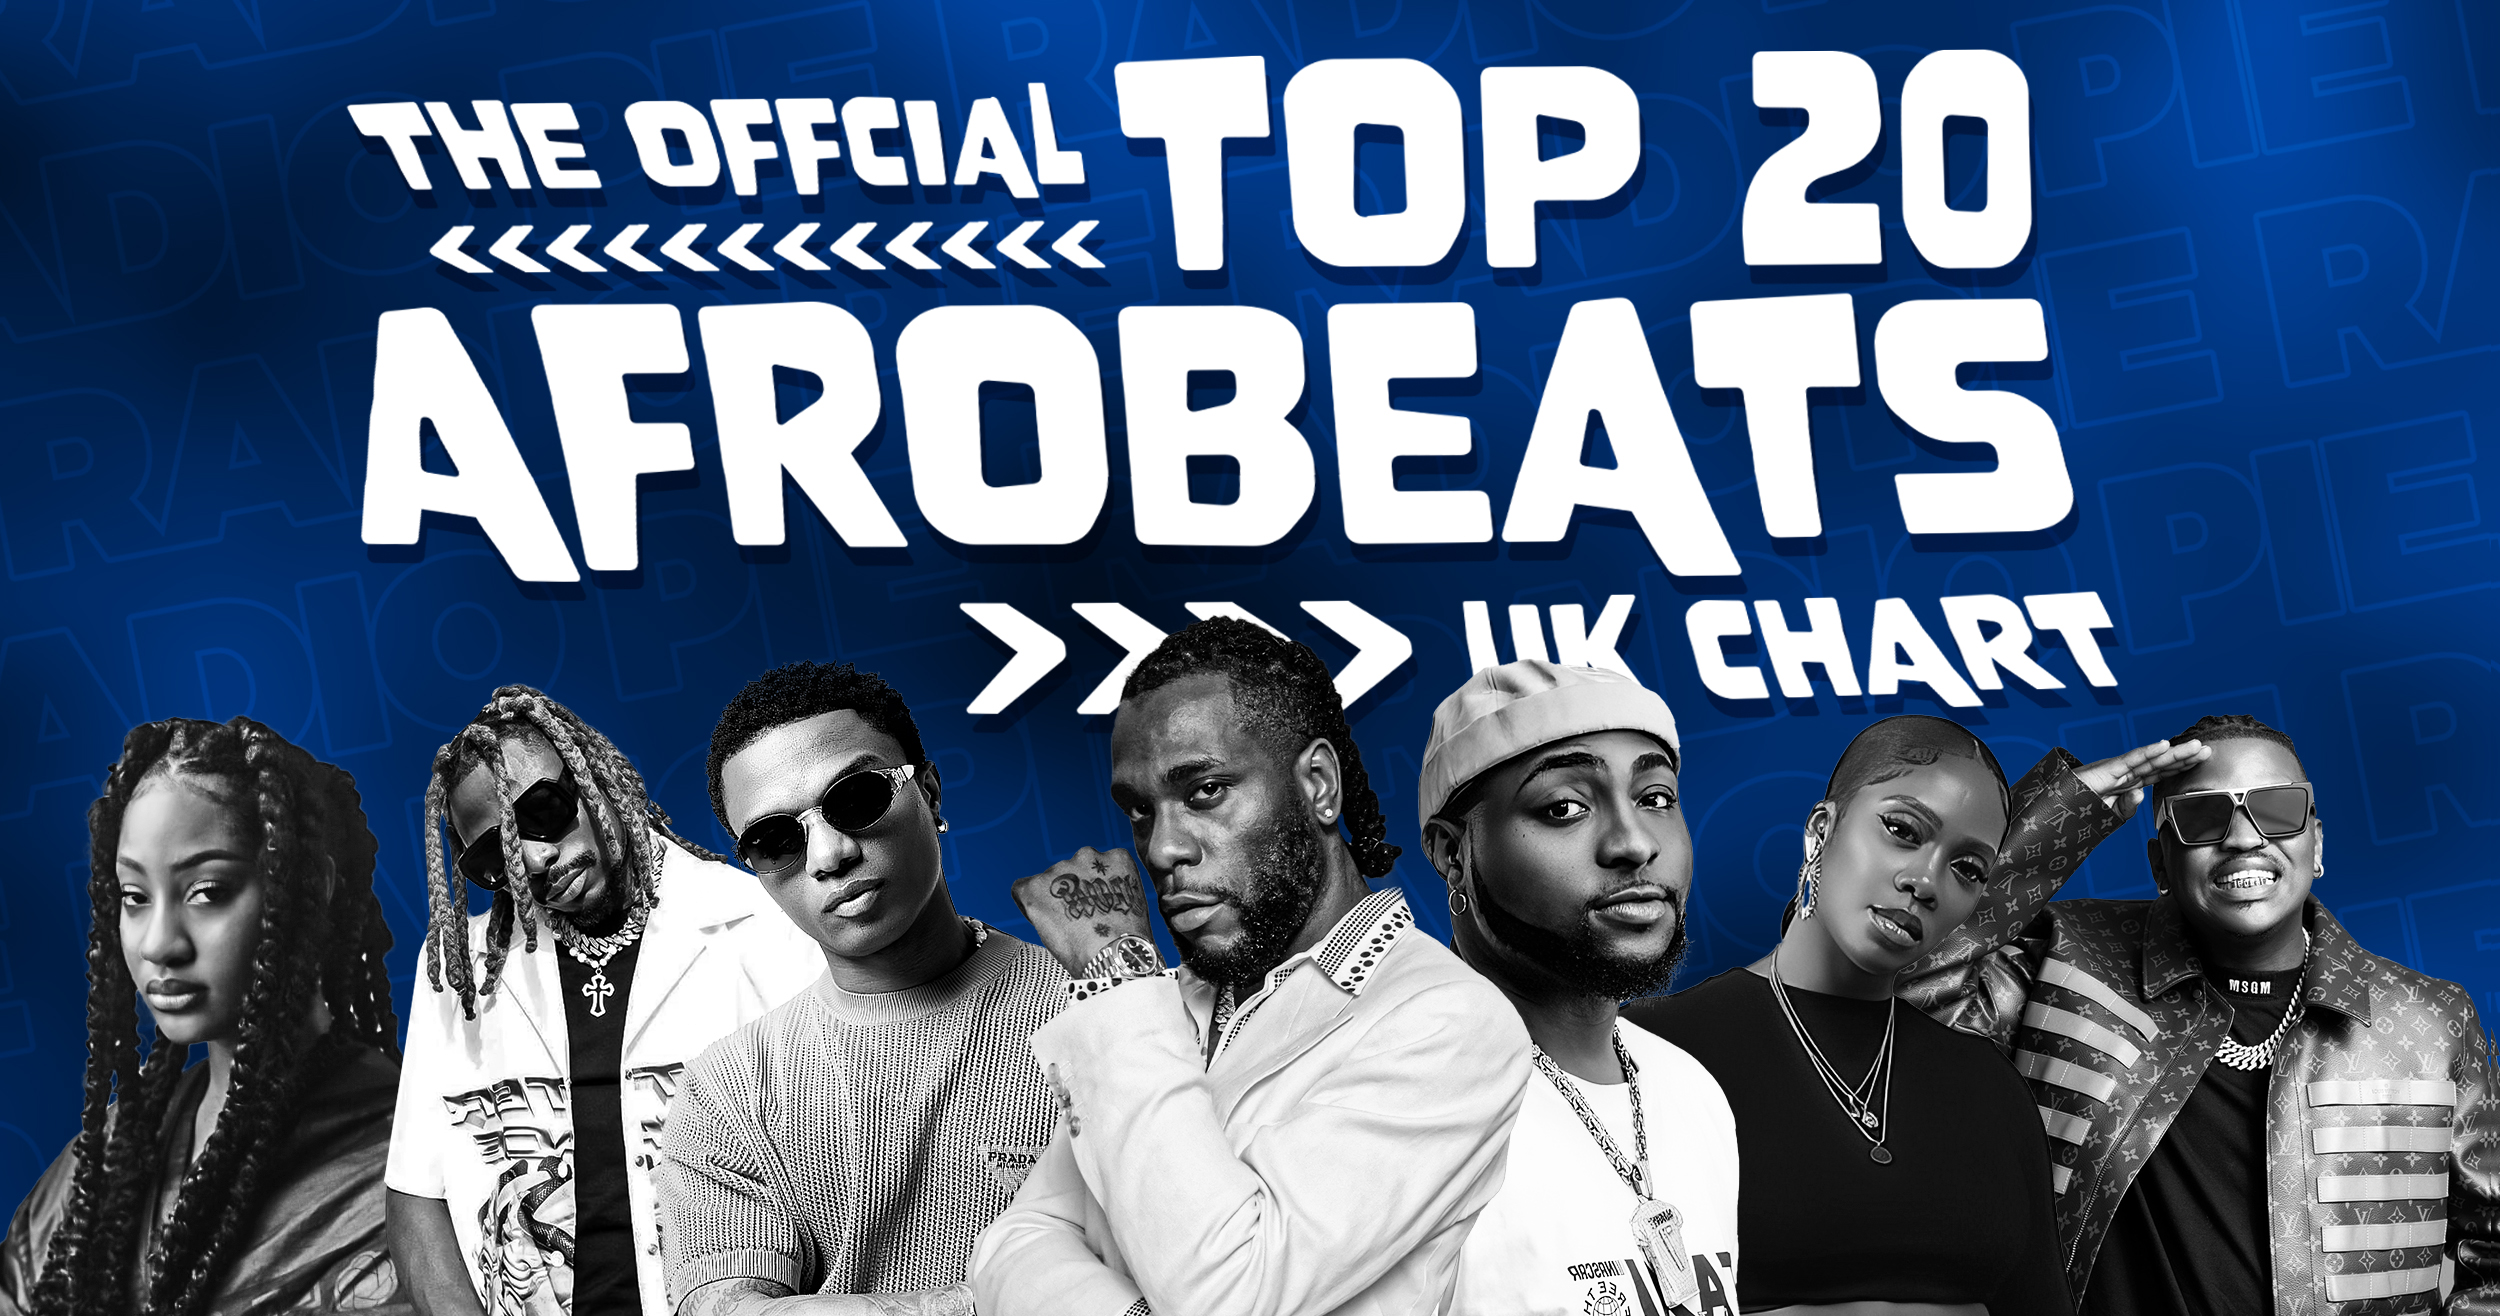 50% of Afrobeats Chart Number 1s over the past year have broken into the UK Official Singles Chart Top 100 Official Afrobeats Chart Top 20